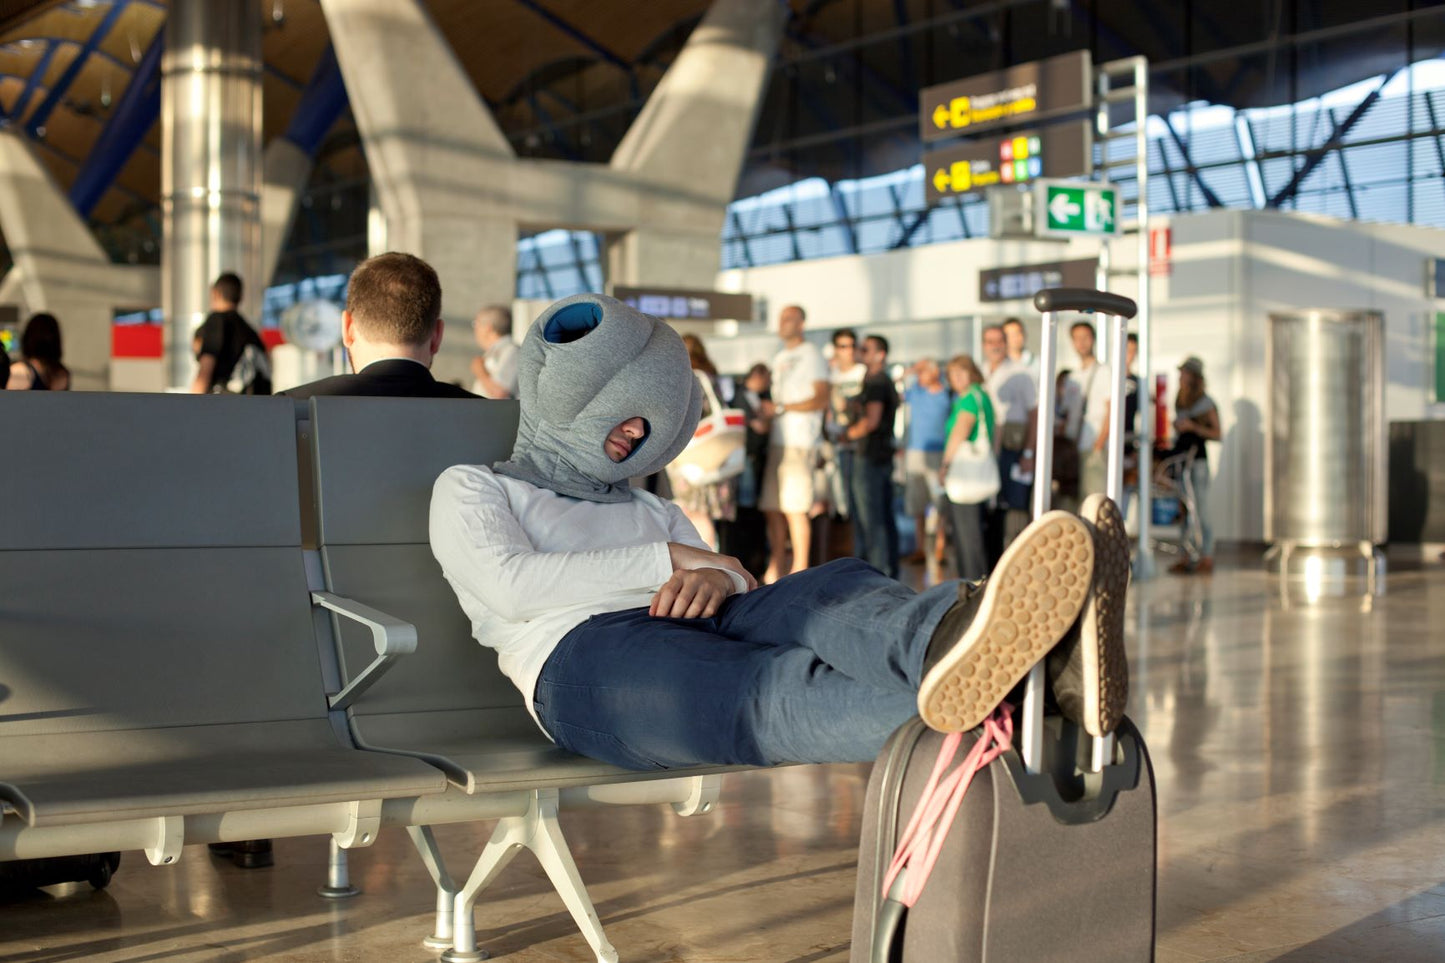 Man Sleeping In Airport With Original Immersive Napping Pillow.